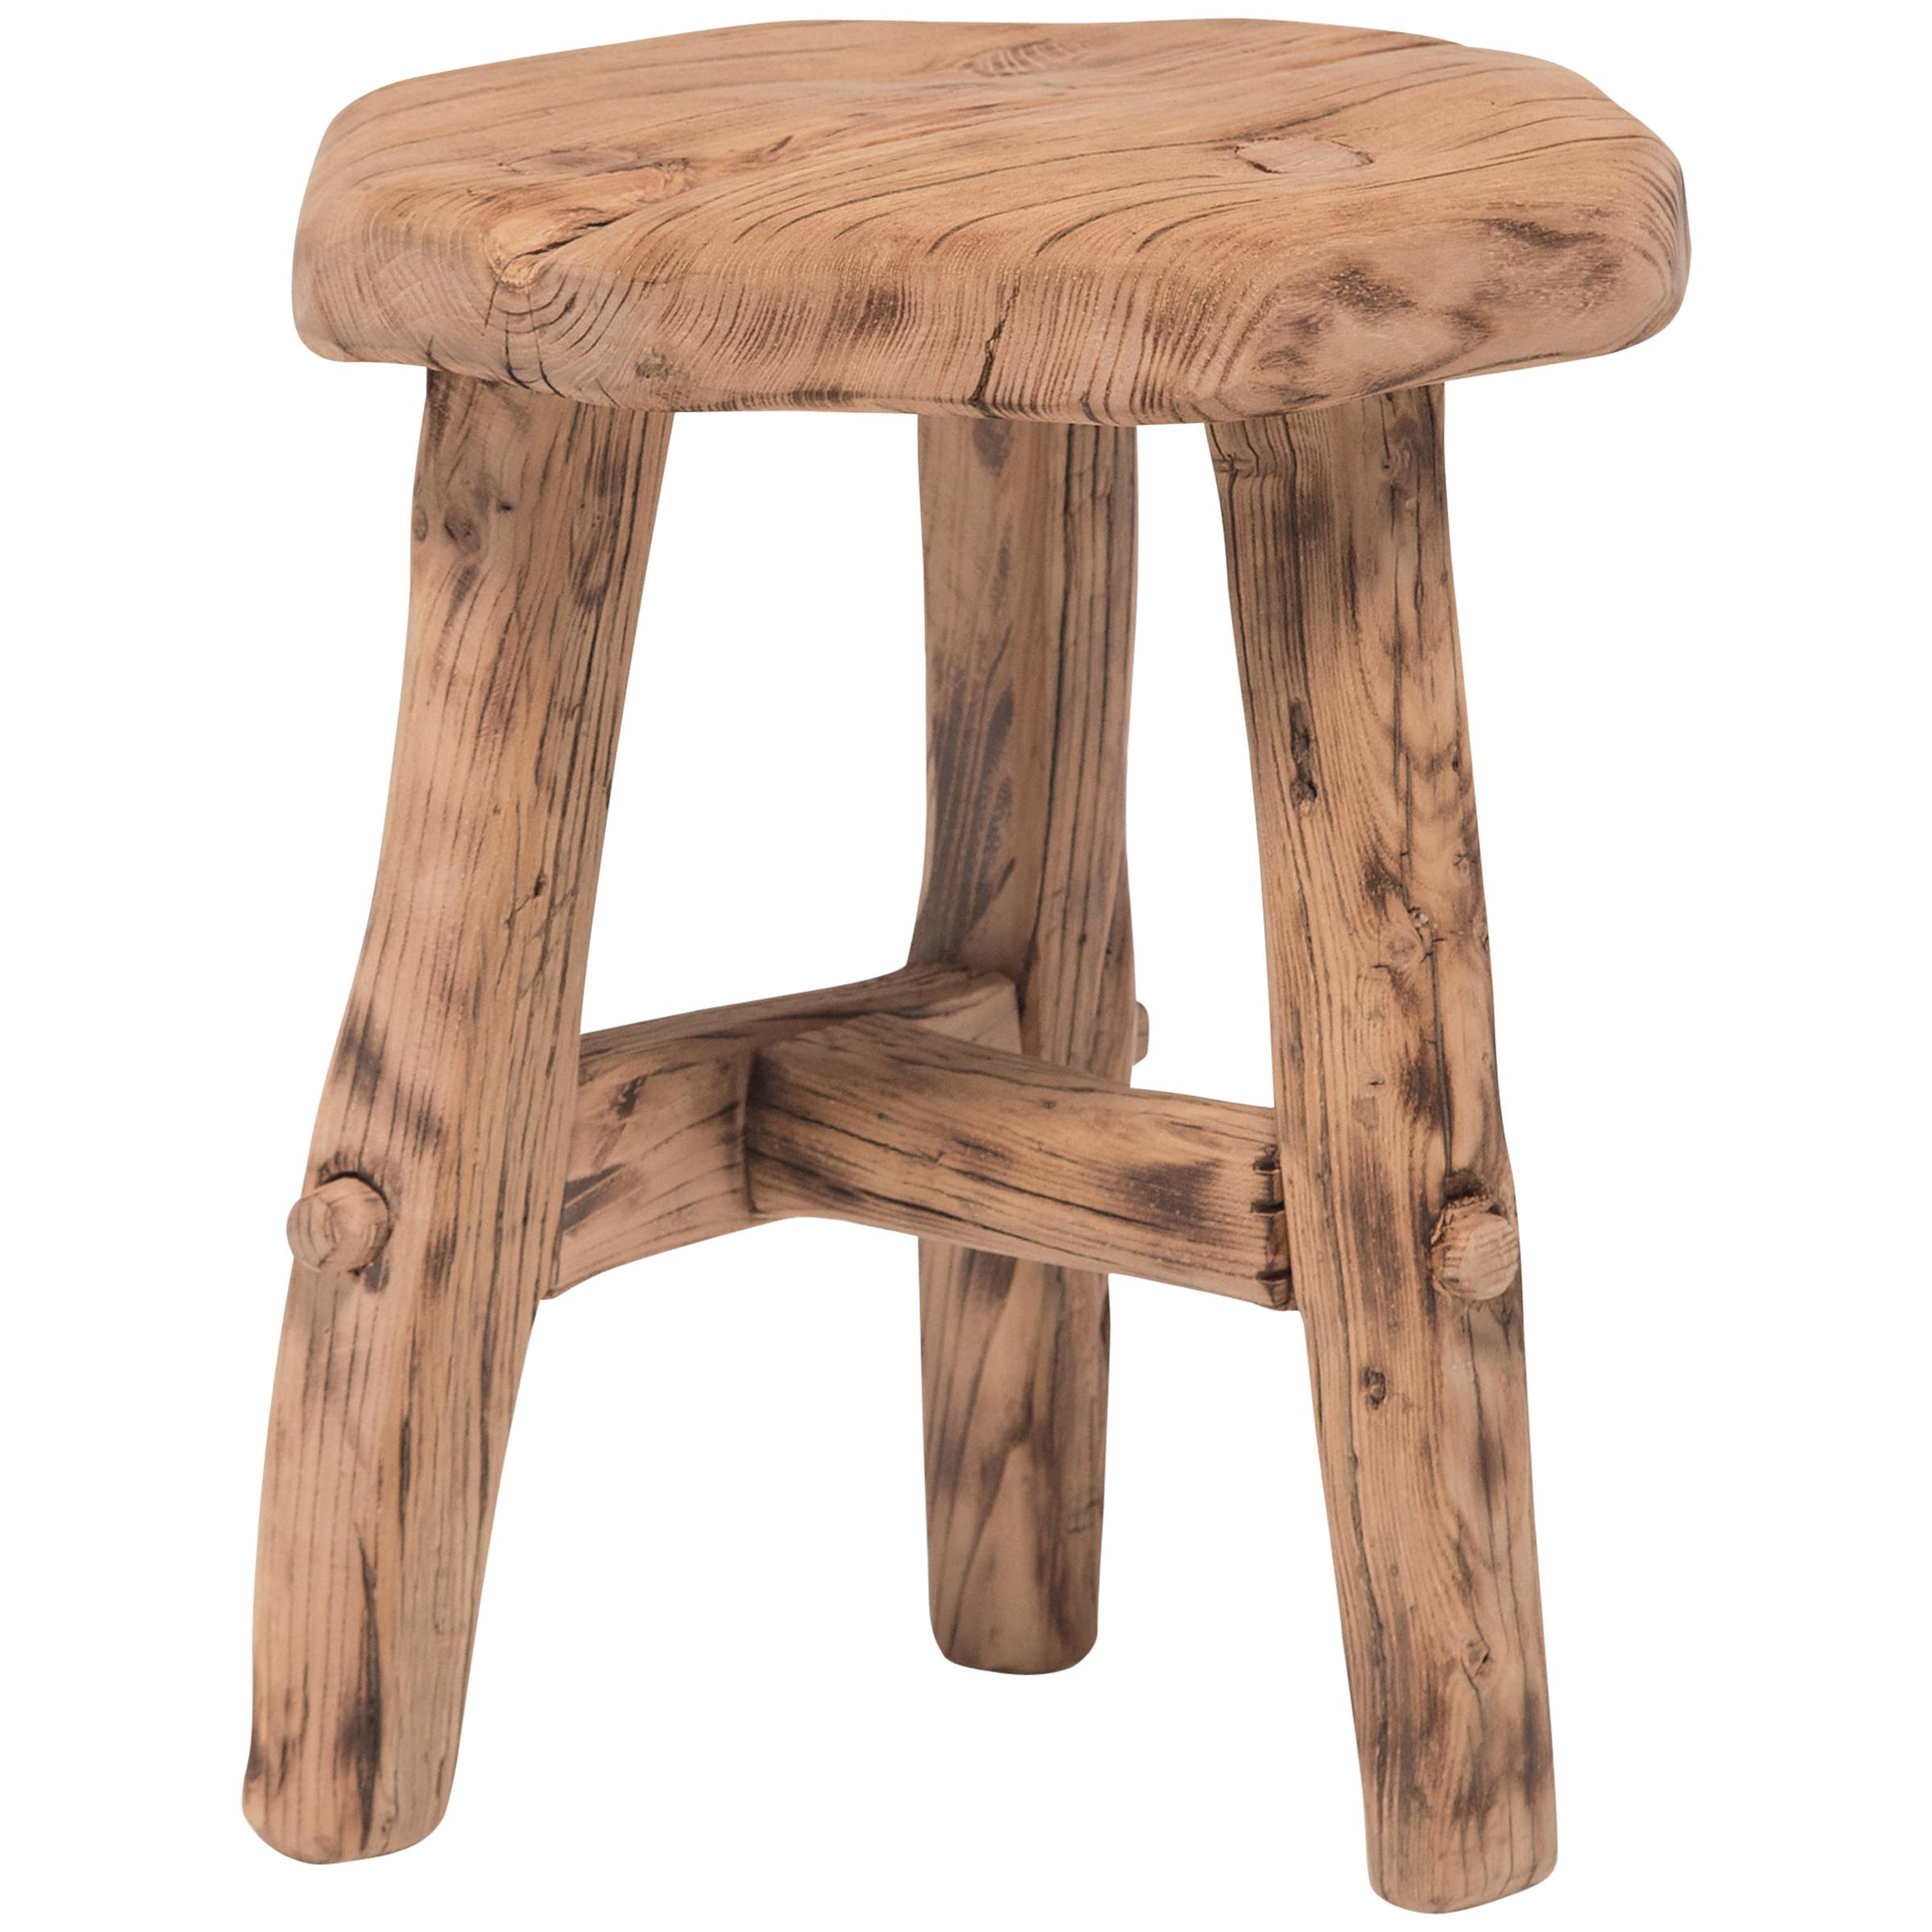 Reclaimed Elm Chinese Courtyard Stool